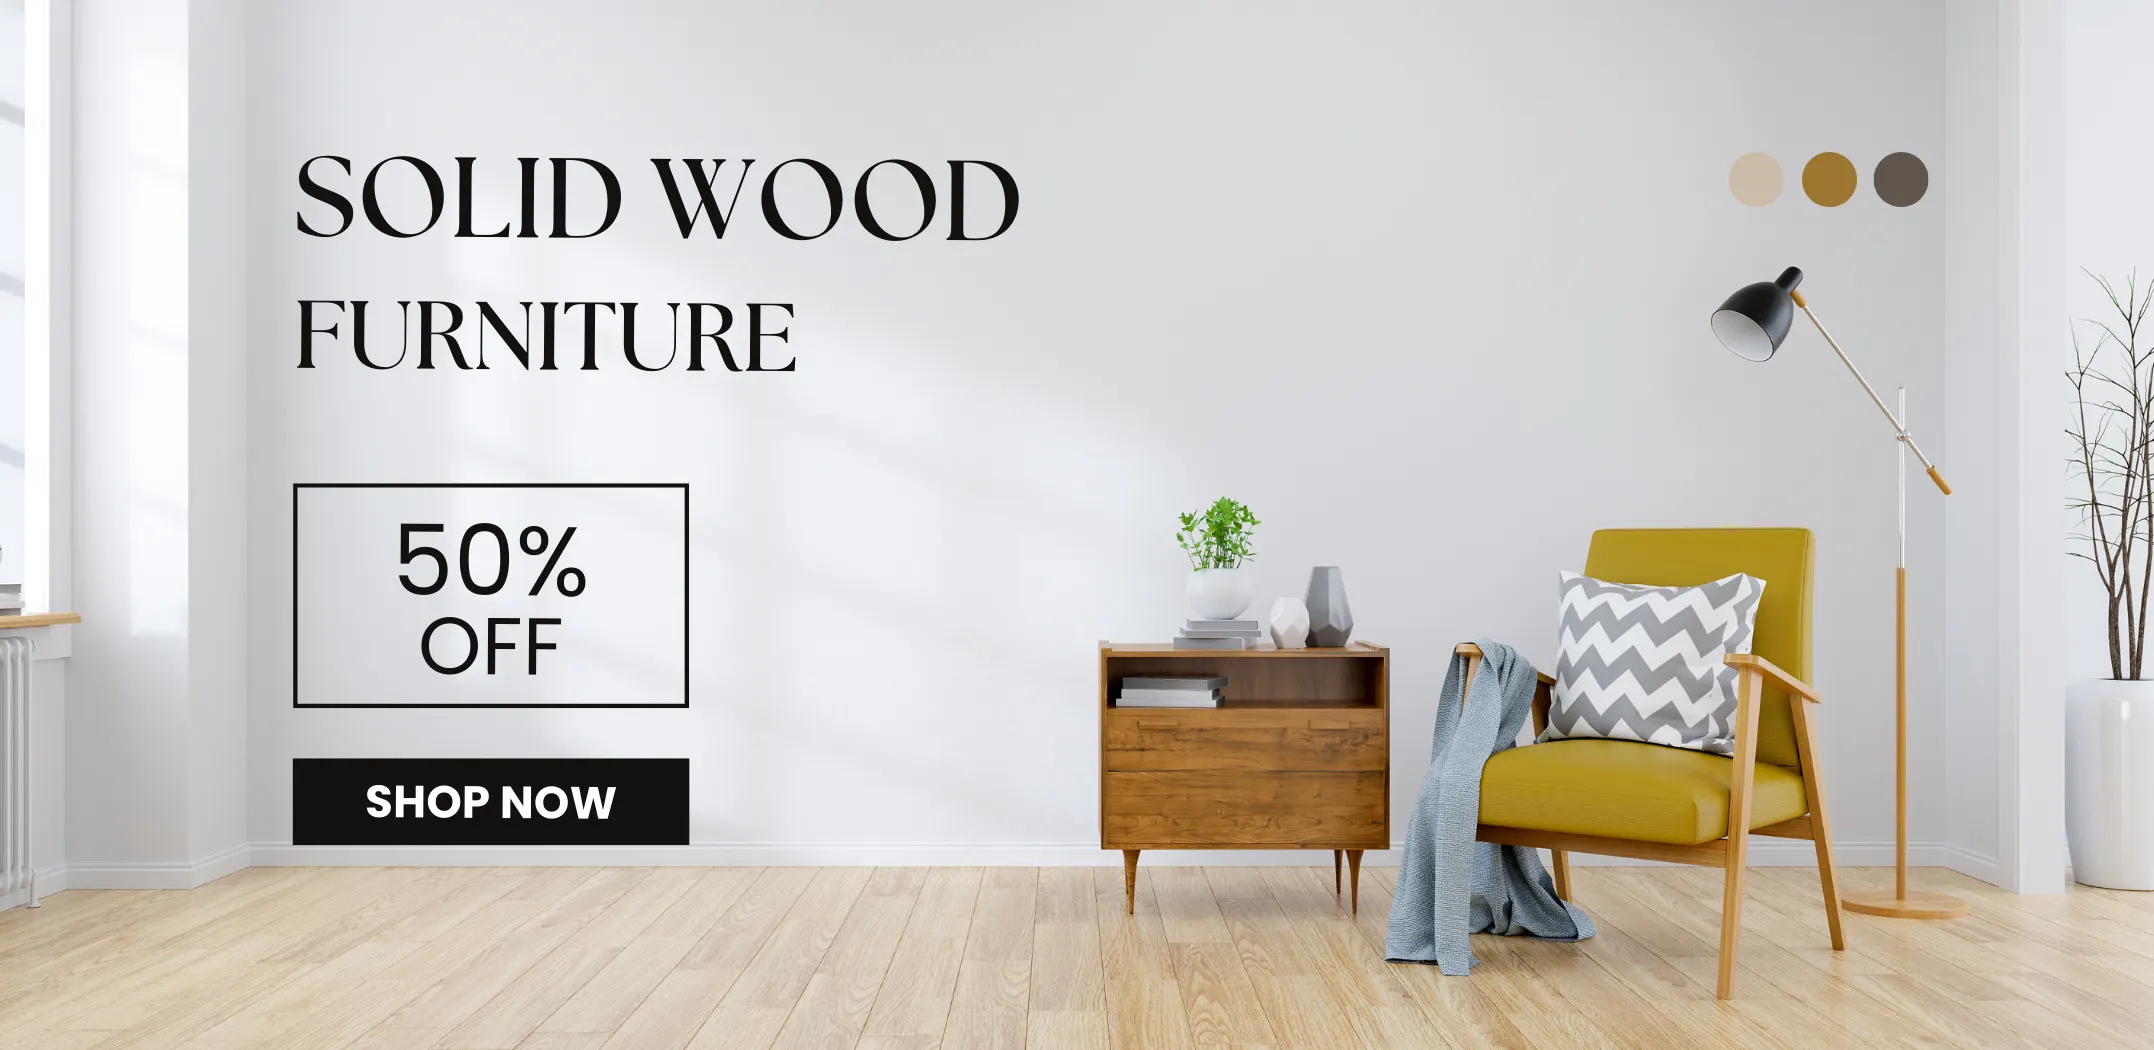 Woods Royal Solid Wood banner